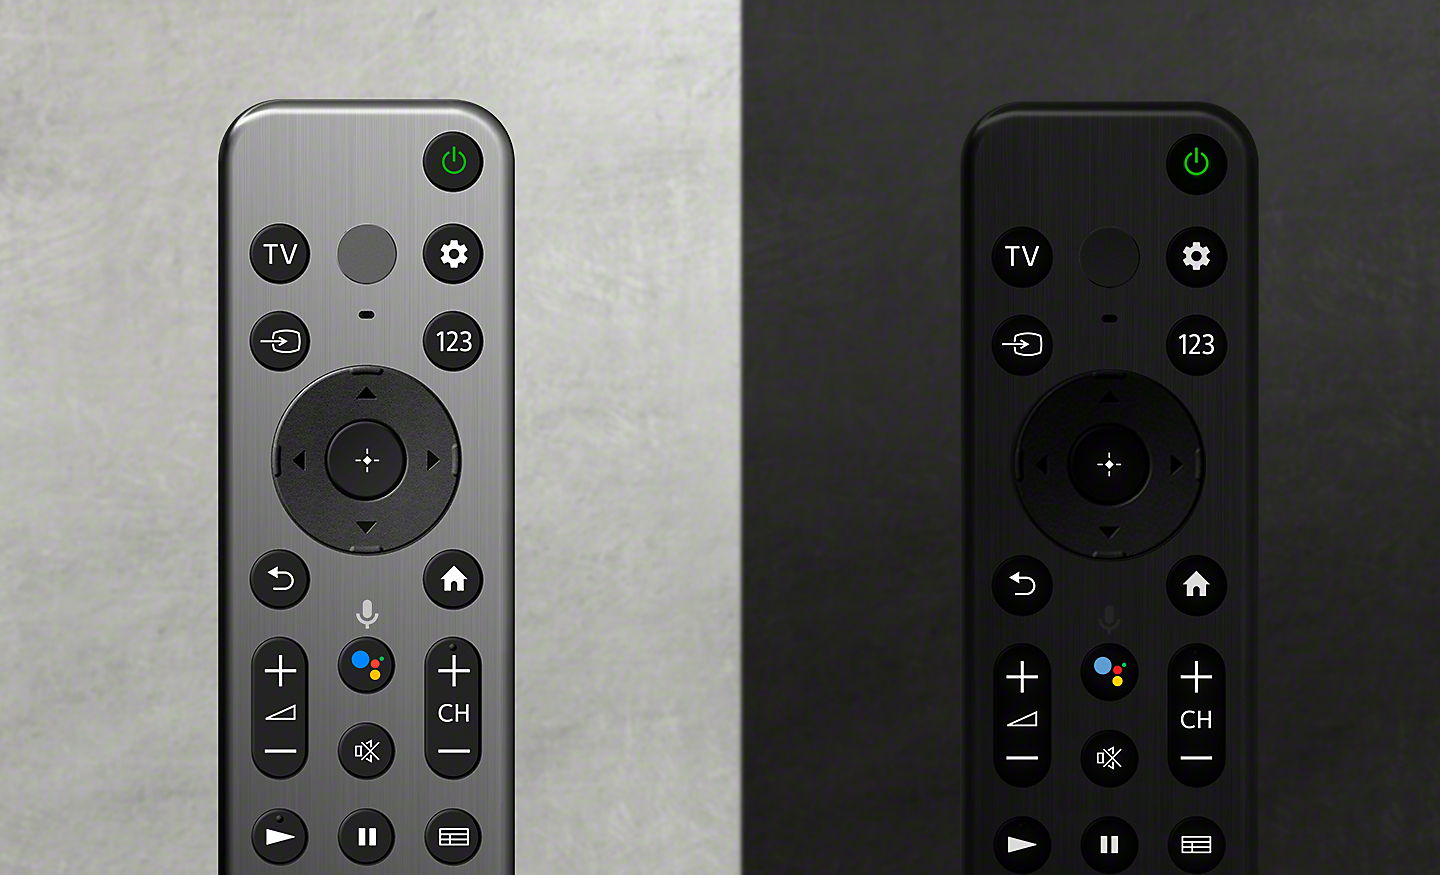 Image of backlit remote in day and night environments